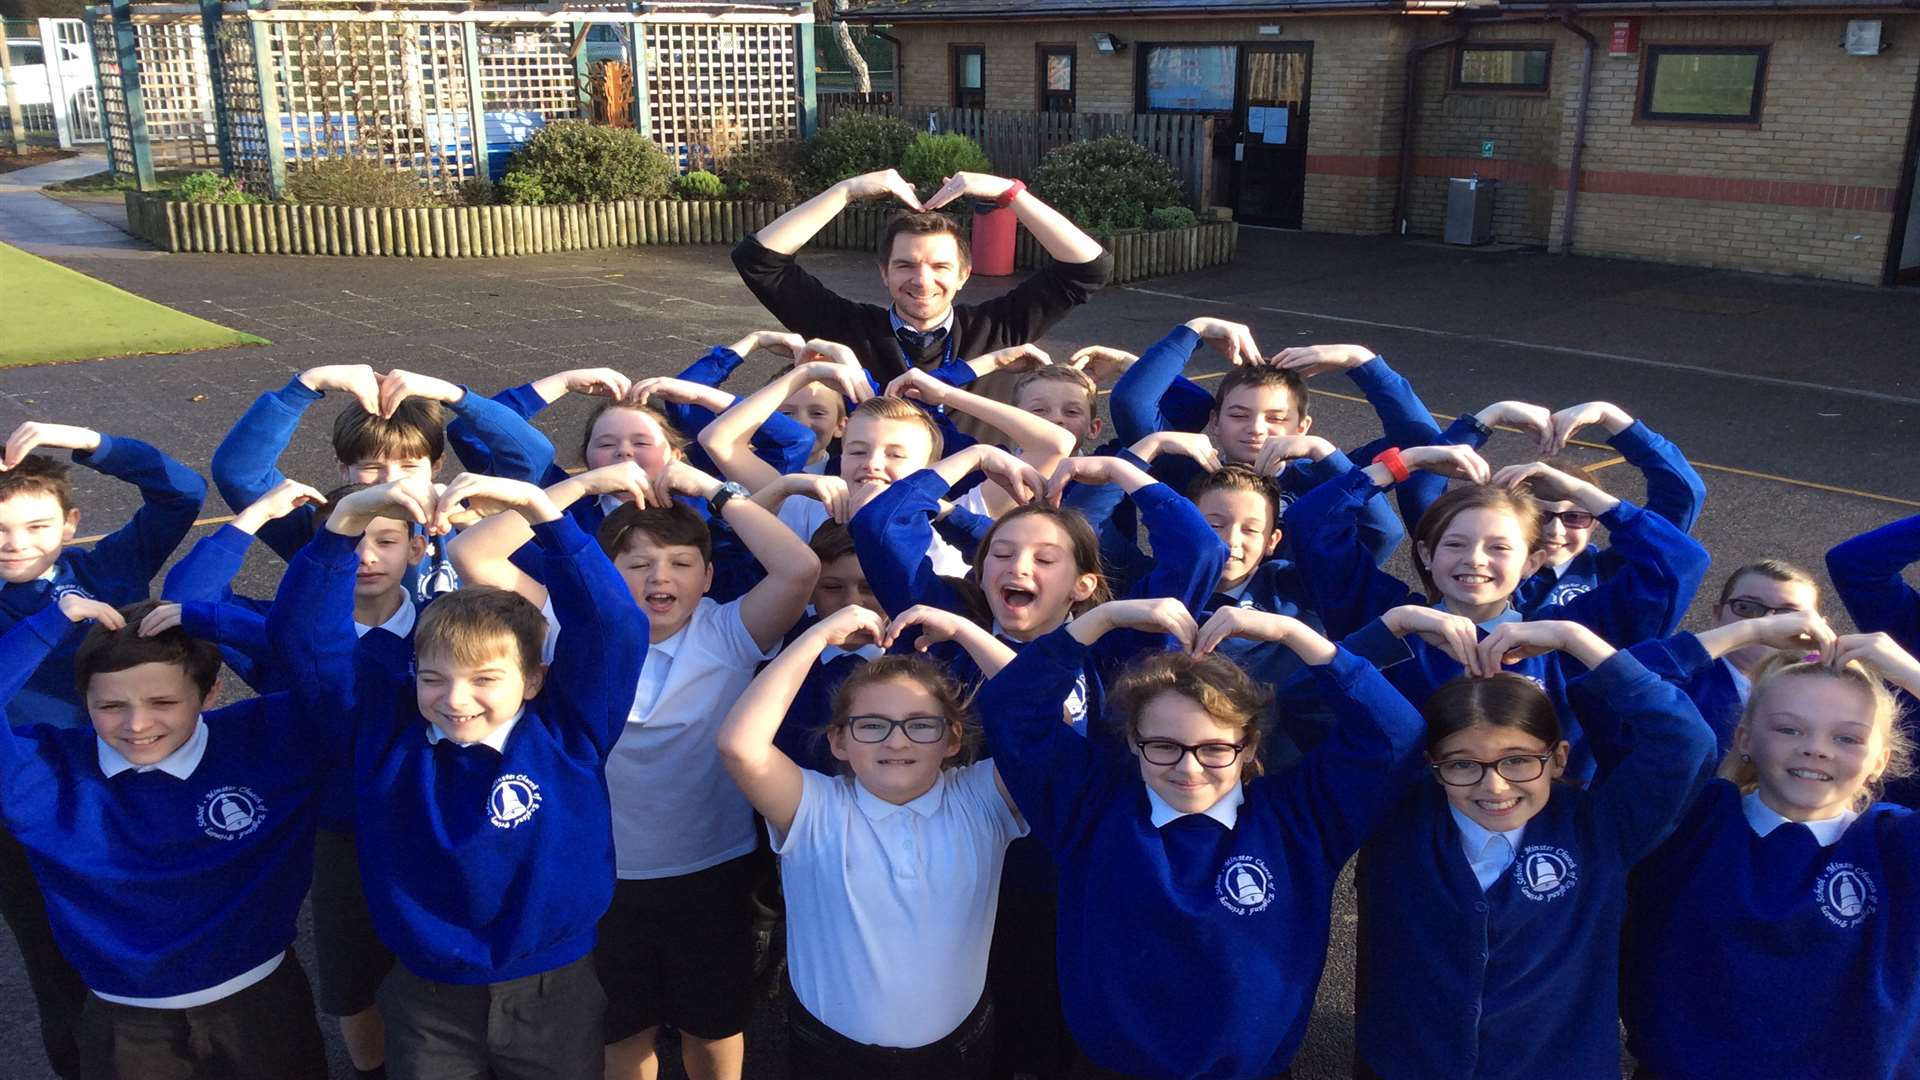 Chris Marston with his class doing The Mobot ready for the marathon